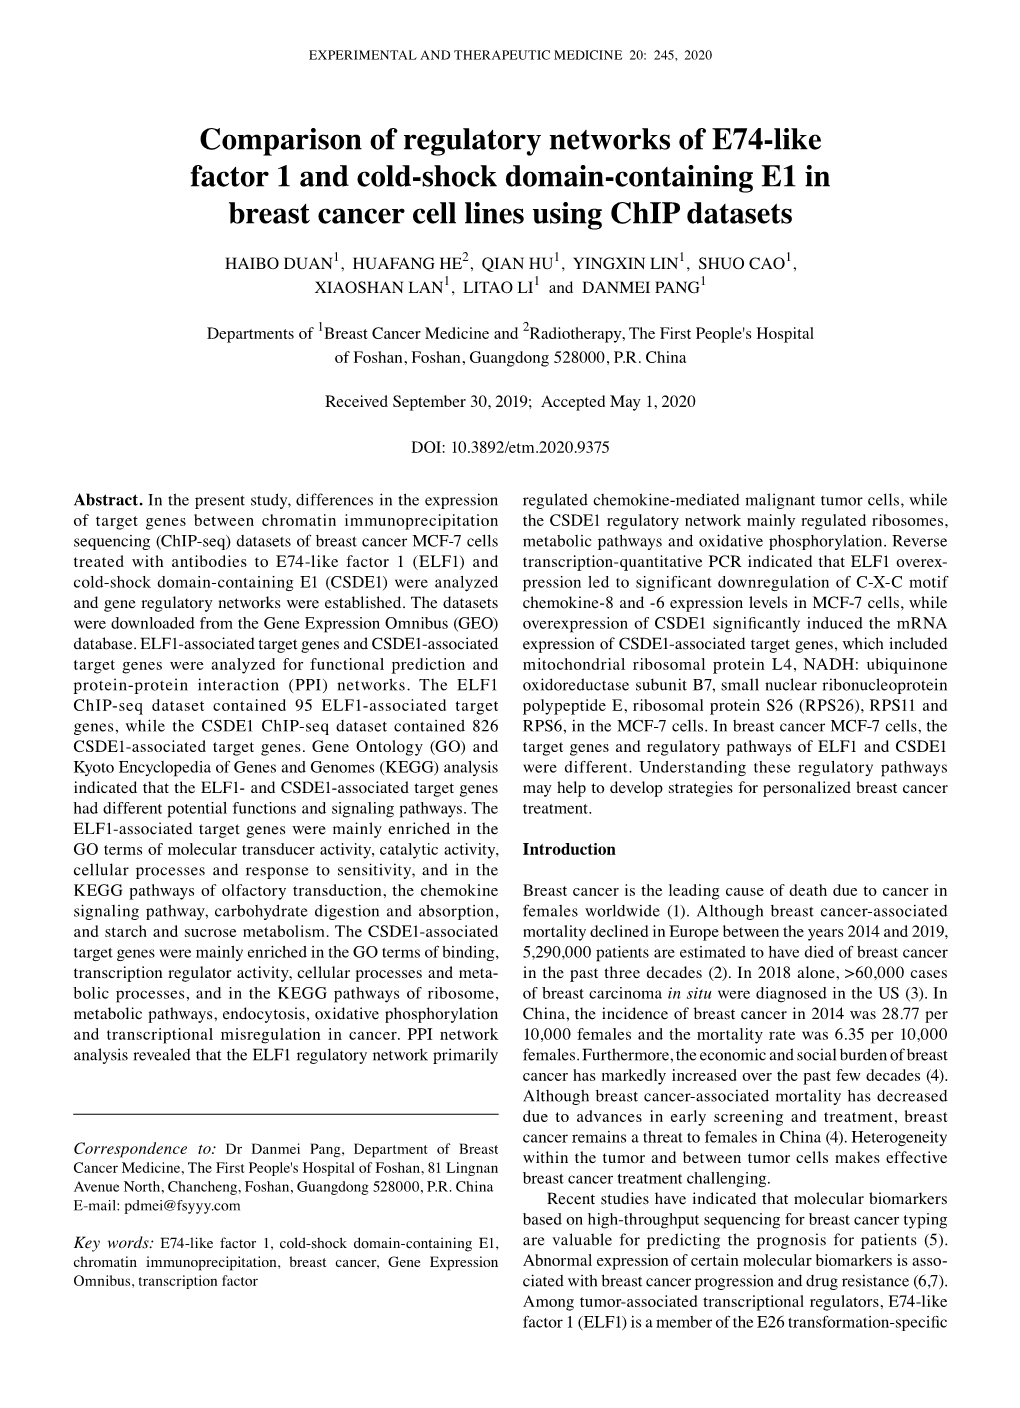 Comparison of Regulatory Networks of E74‑Like Factor 1 and Cold‑Shock Domain‑Containing E1 in Breast Cancer Cell Lines Using Chip Datasets